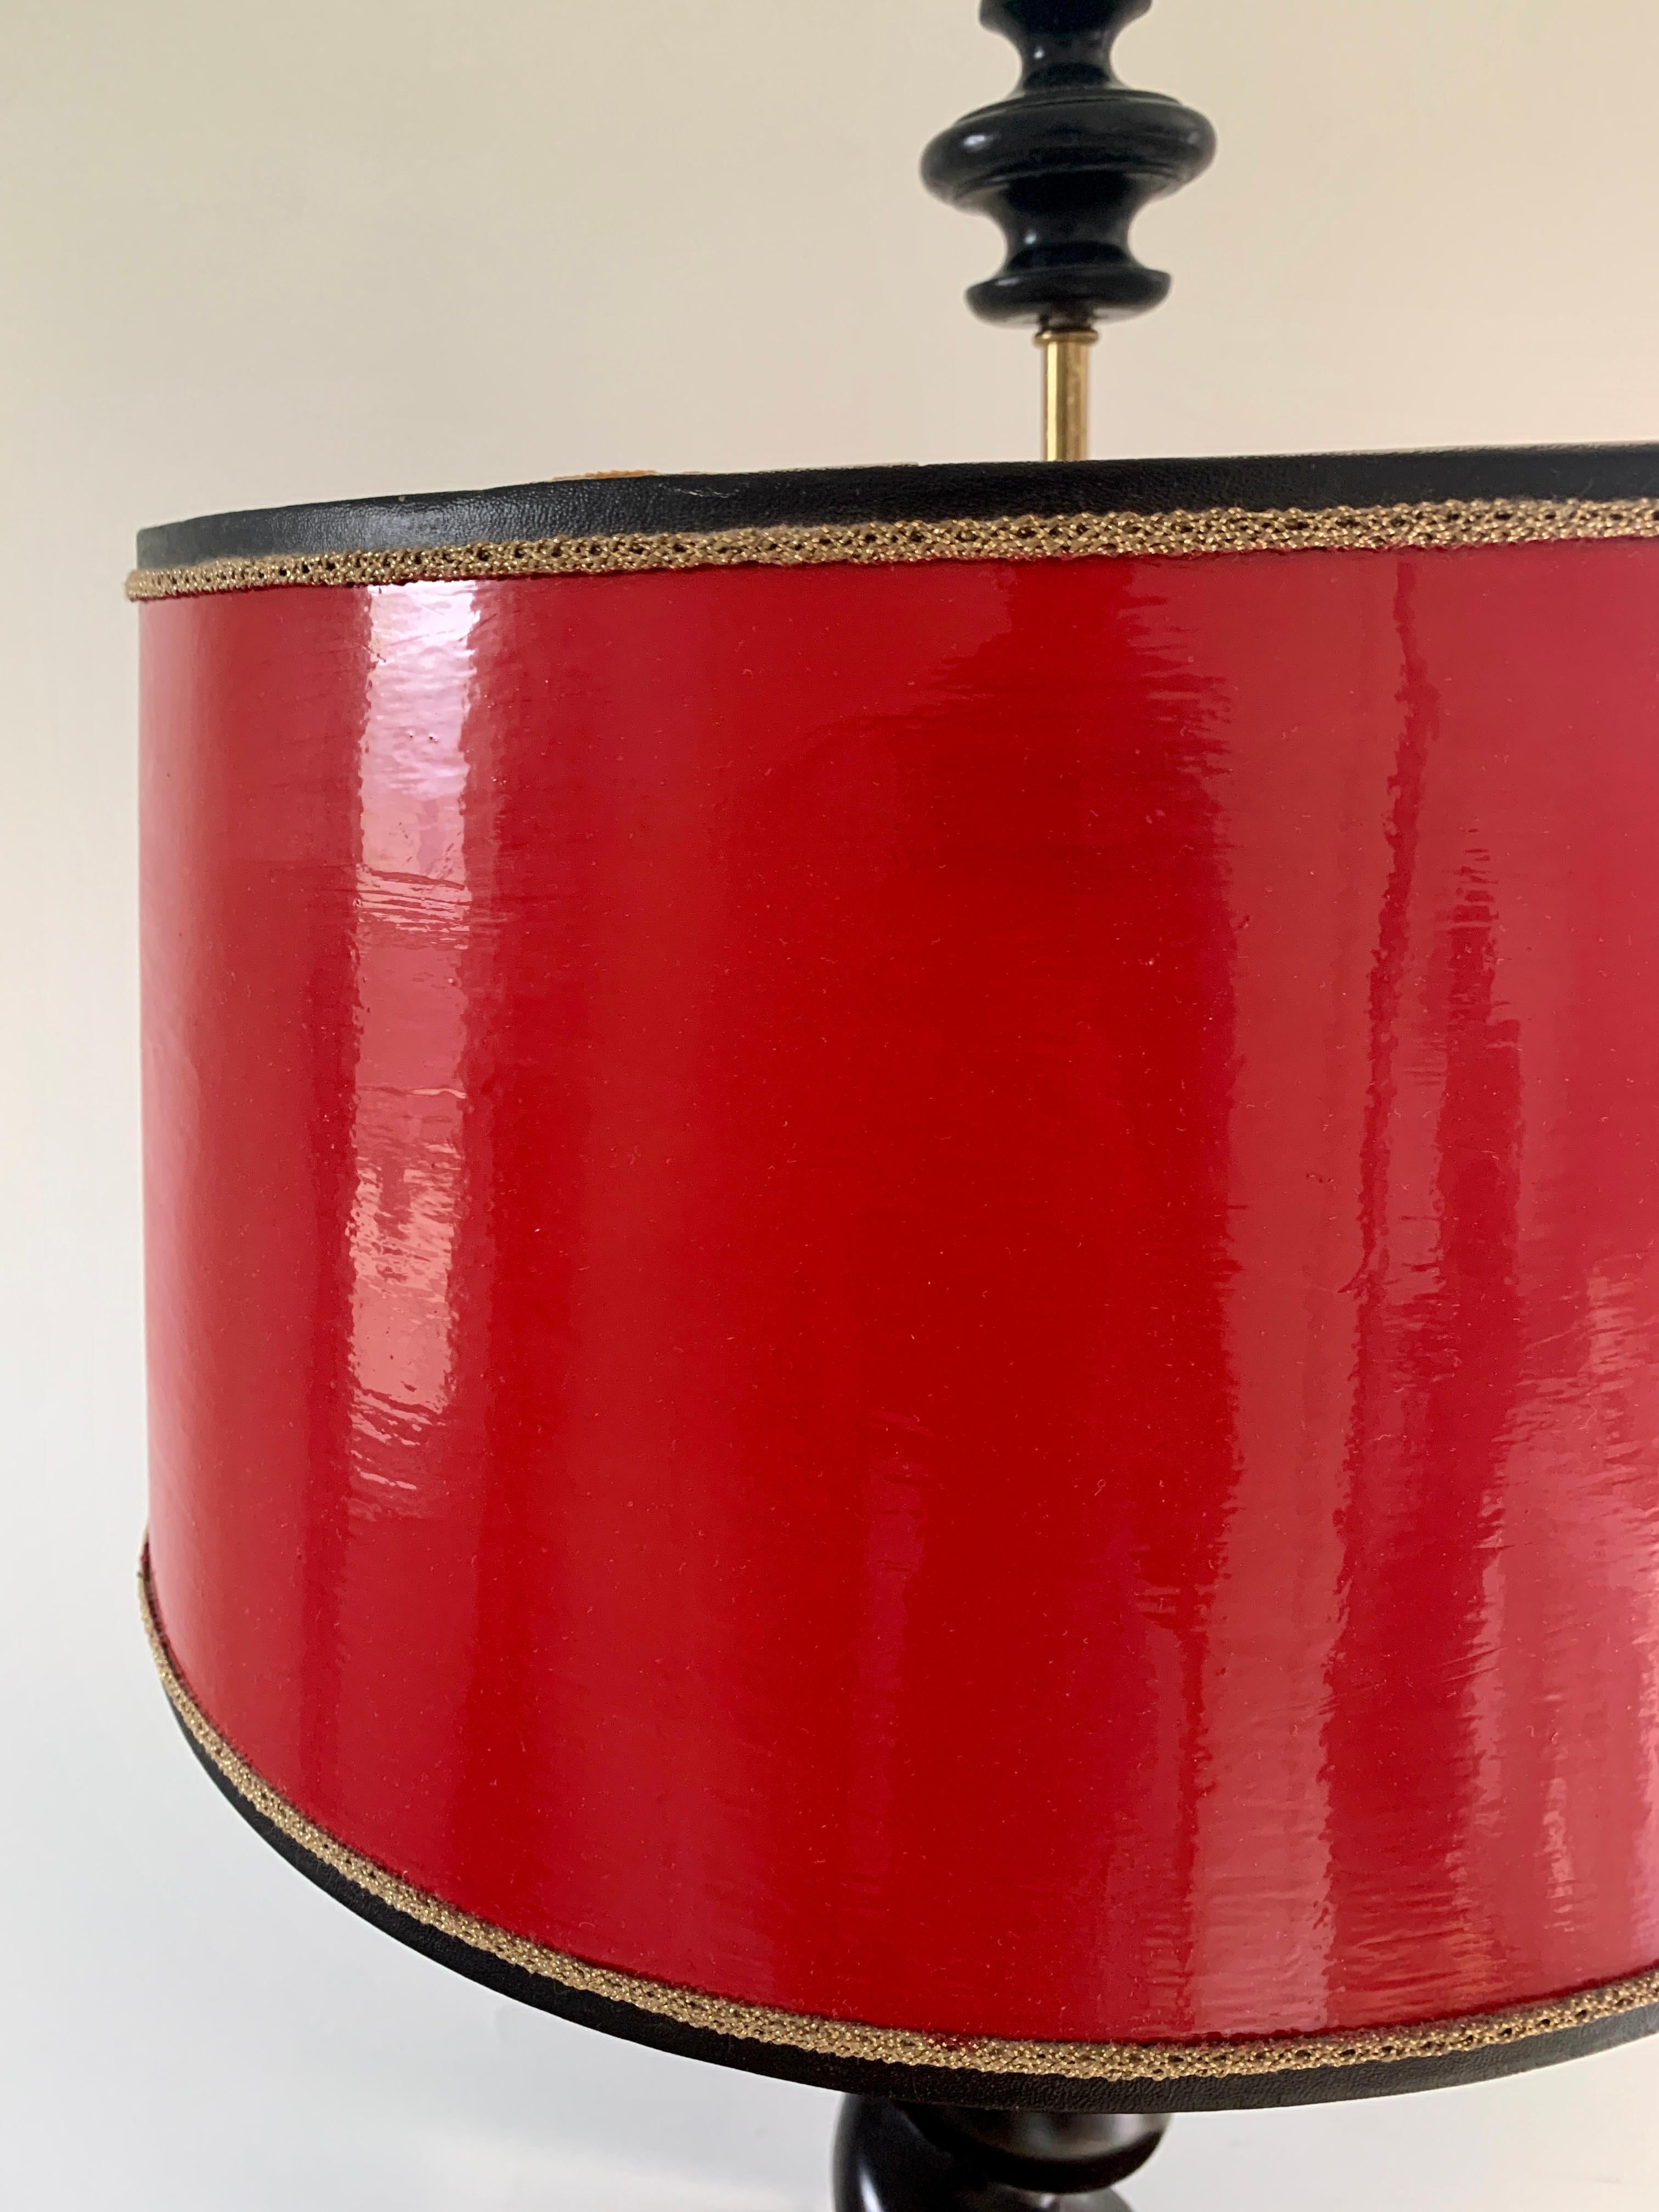 Ebonized Oak Barley Twist Table Lamp with Red Lacquered Shade In Good Condition For Sale In Elkhart, IN